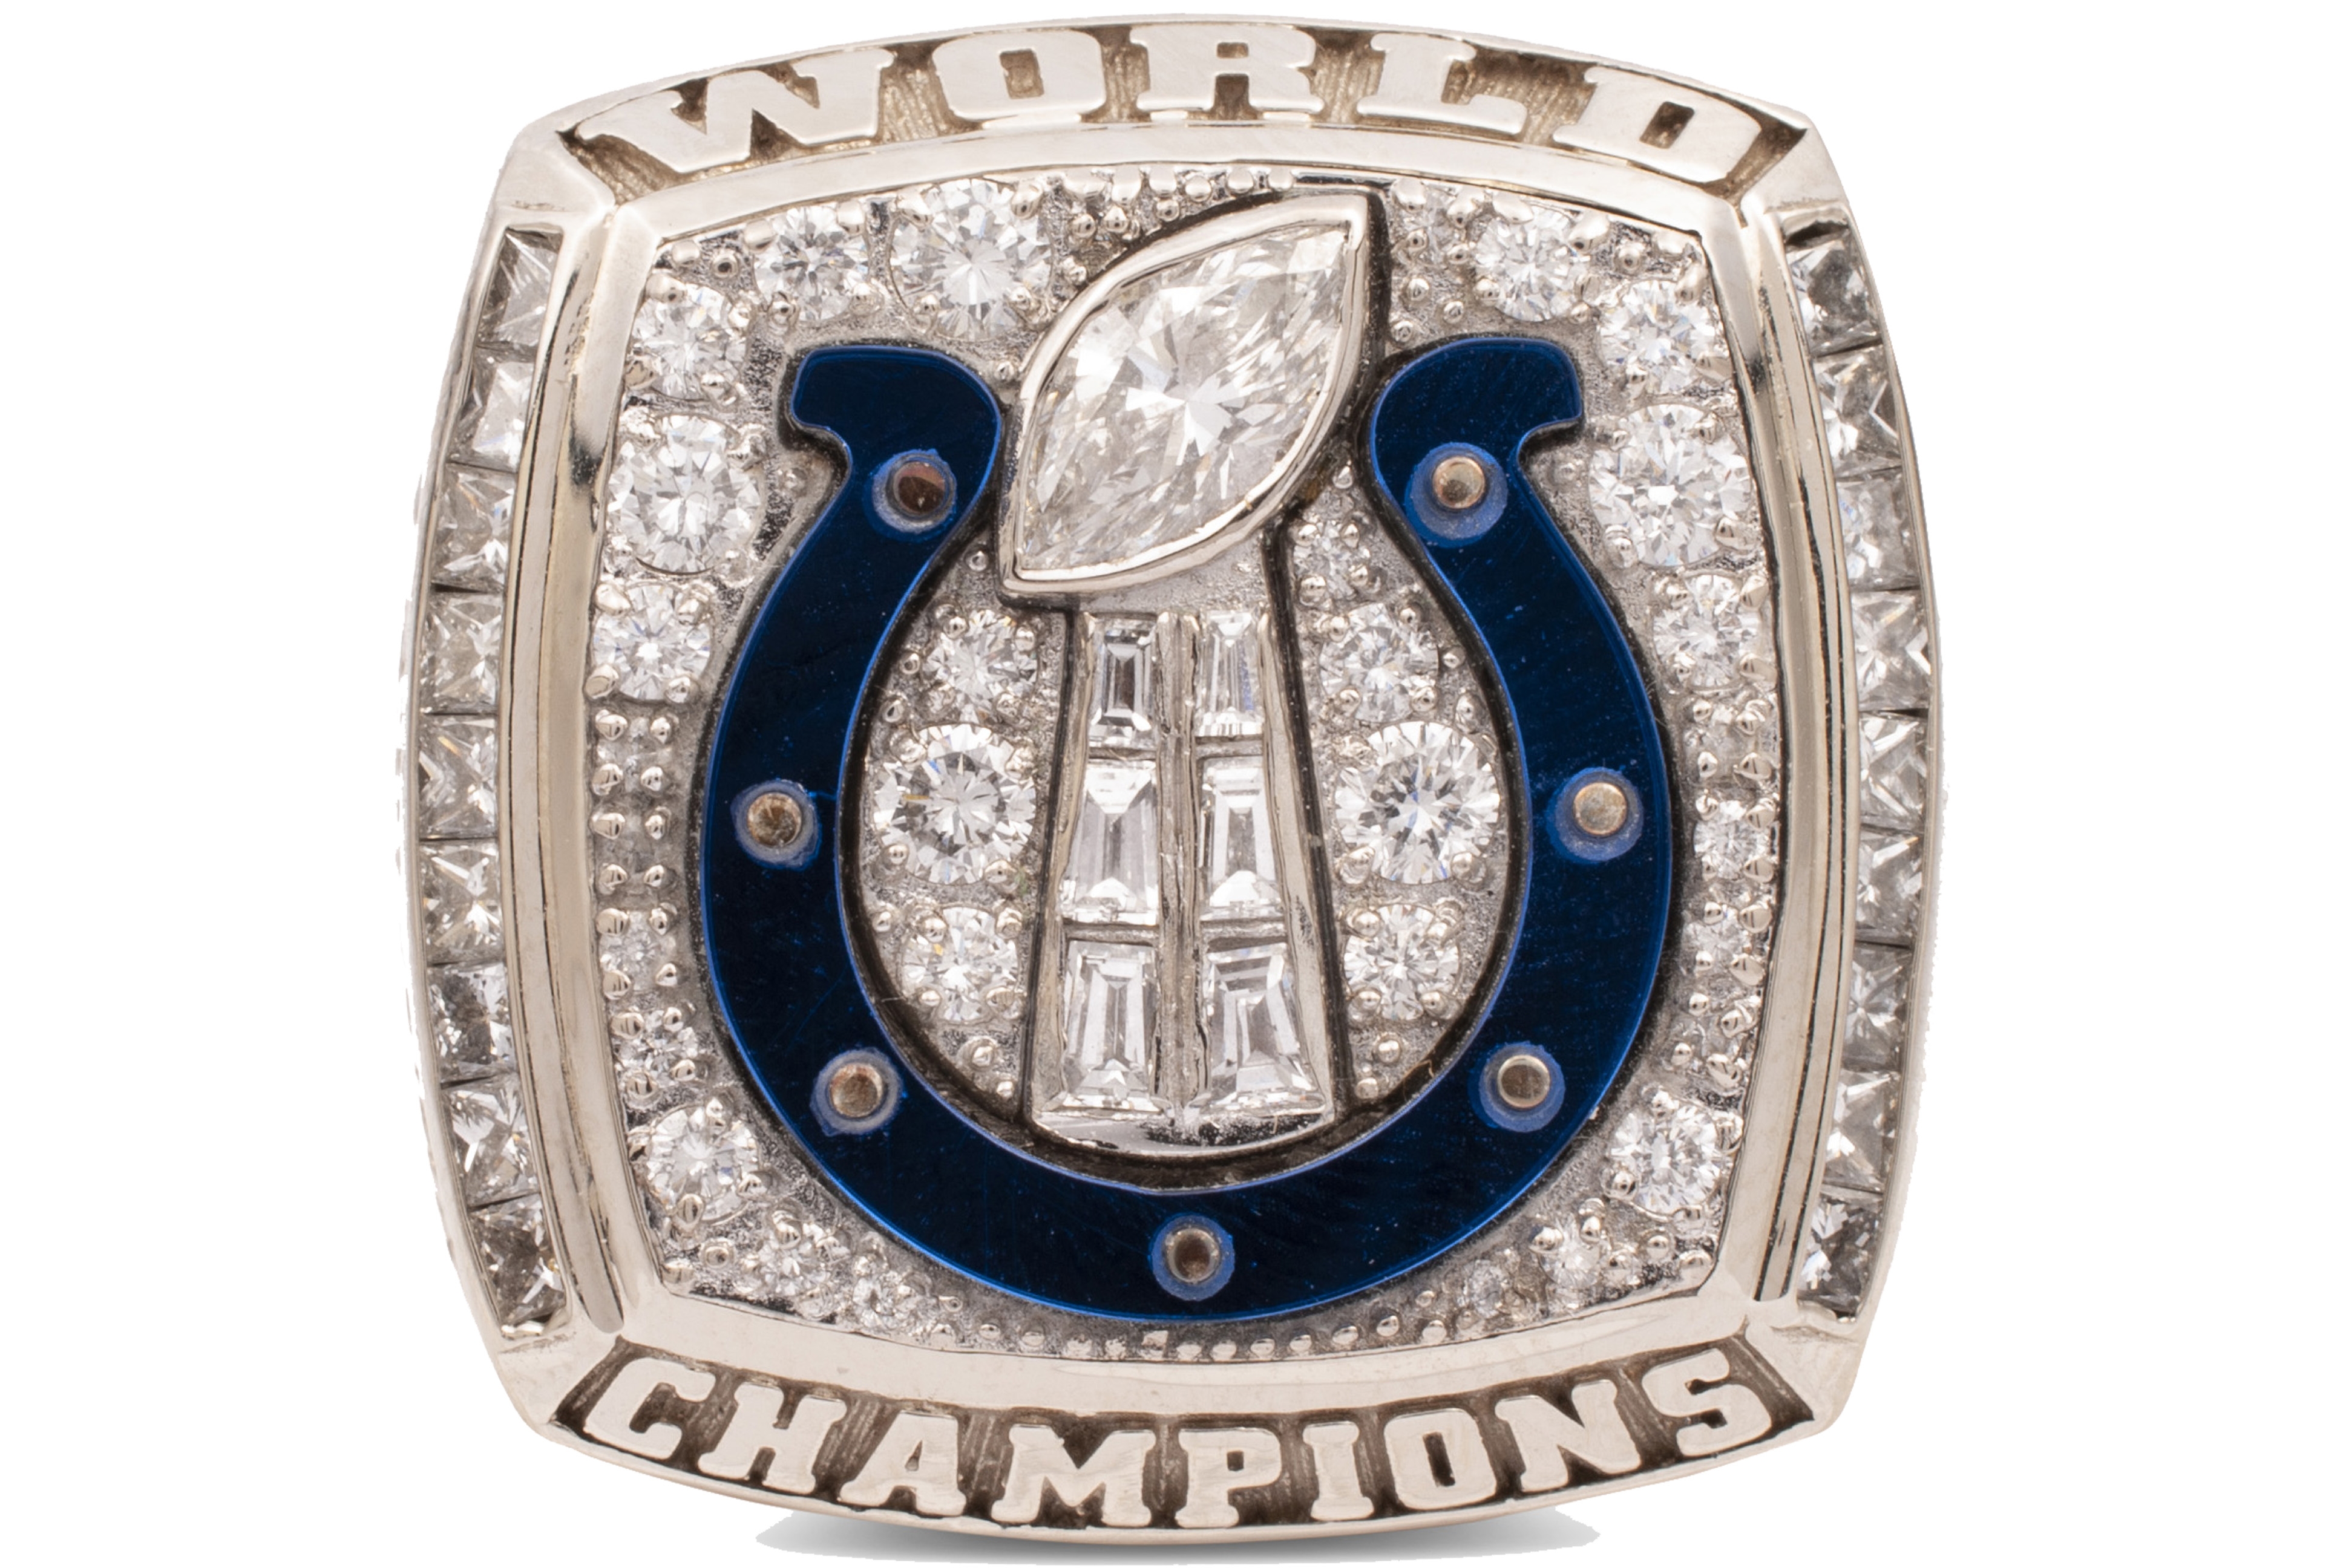 Sold at Auction: Indianapolis Colts 2006 Championship Ring.